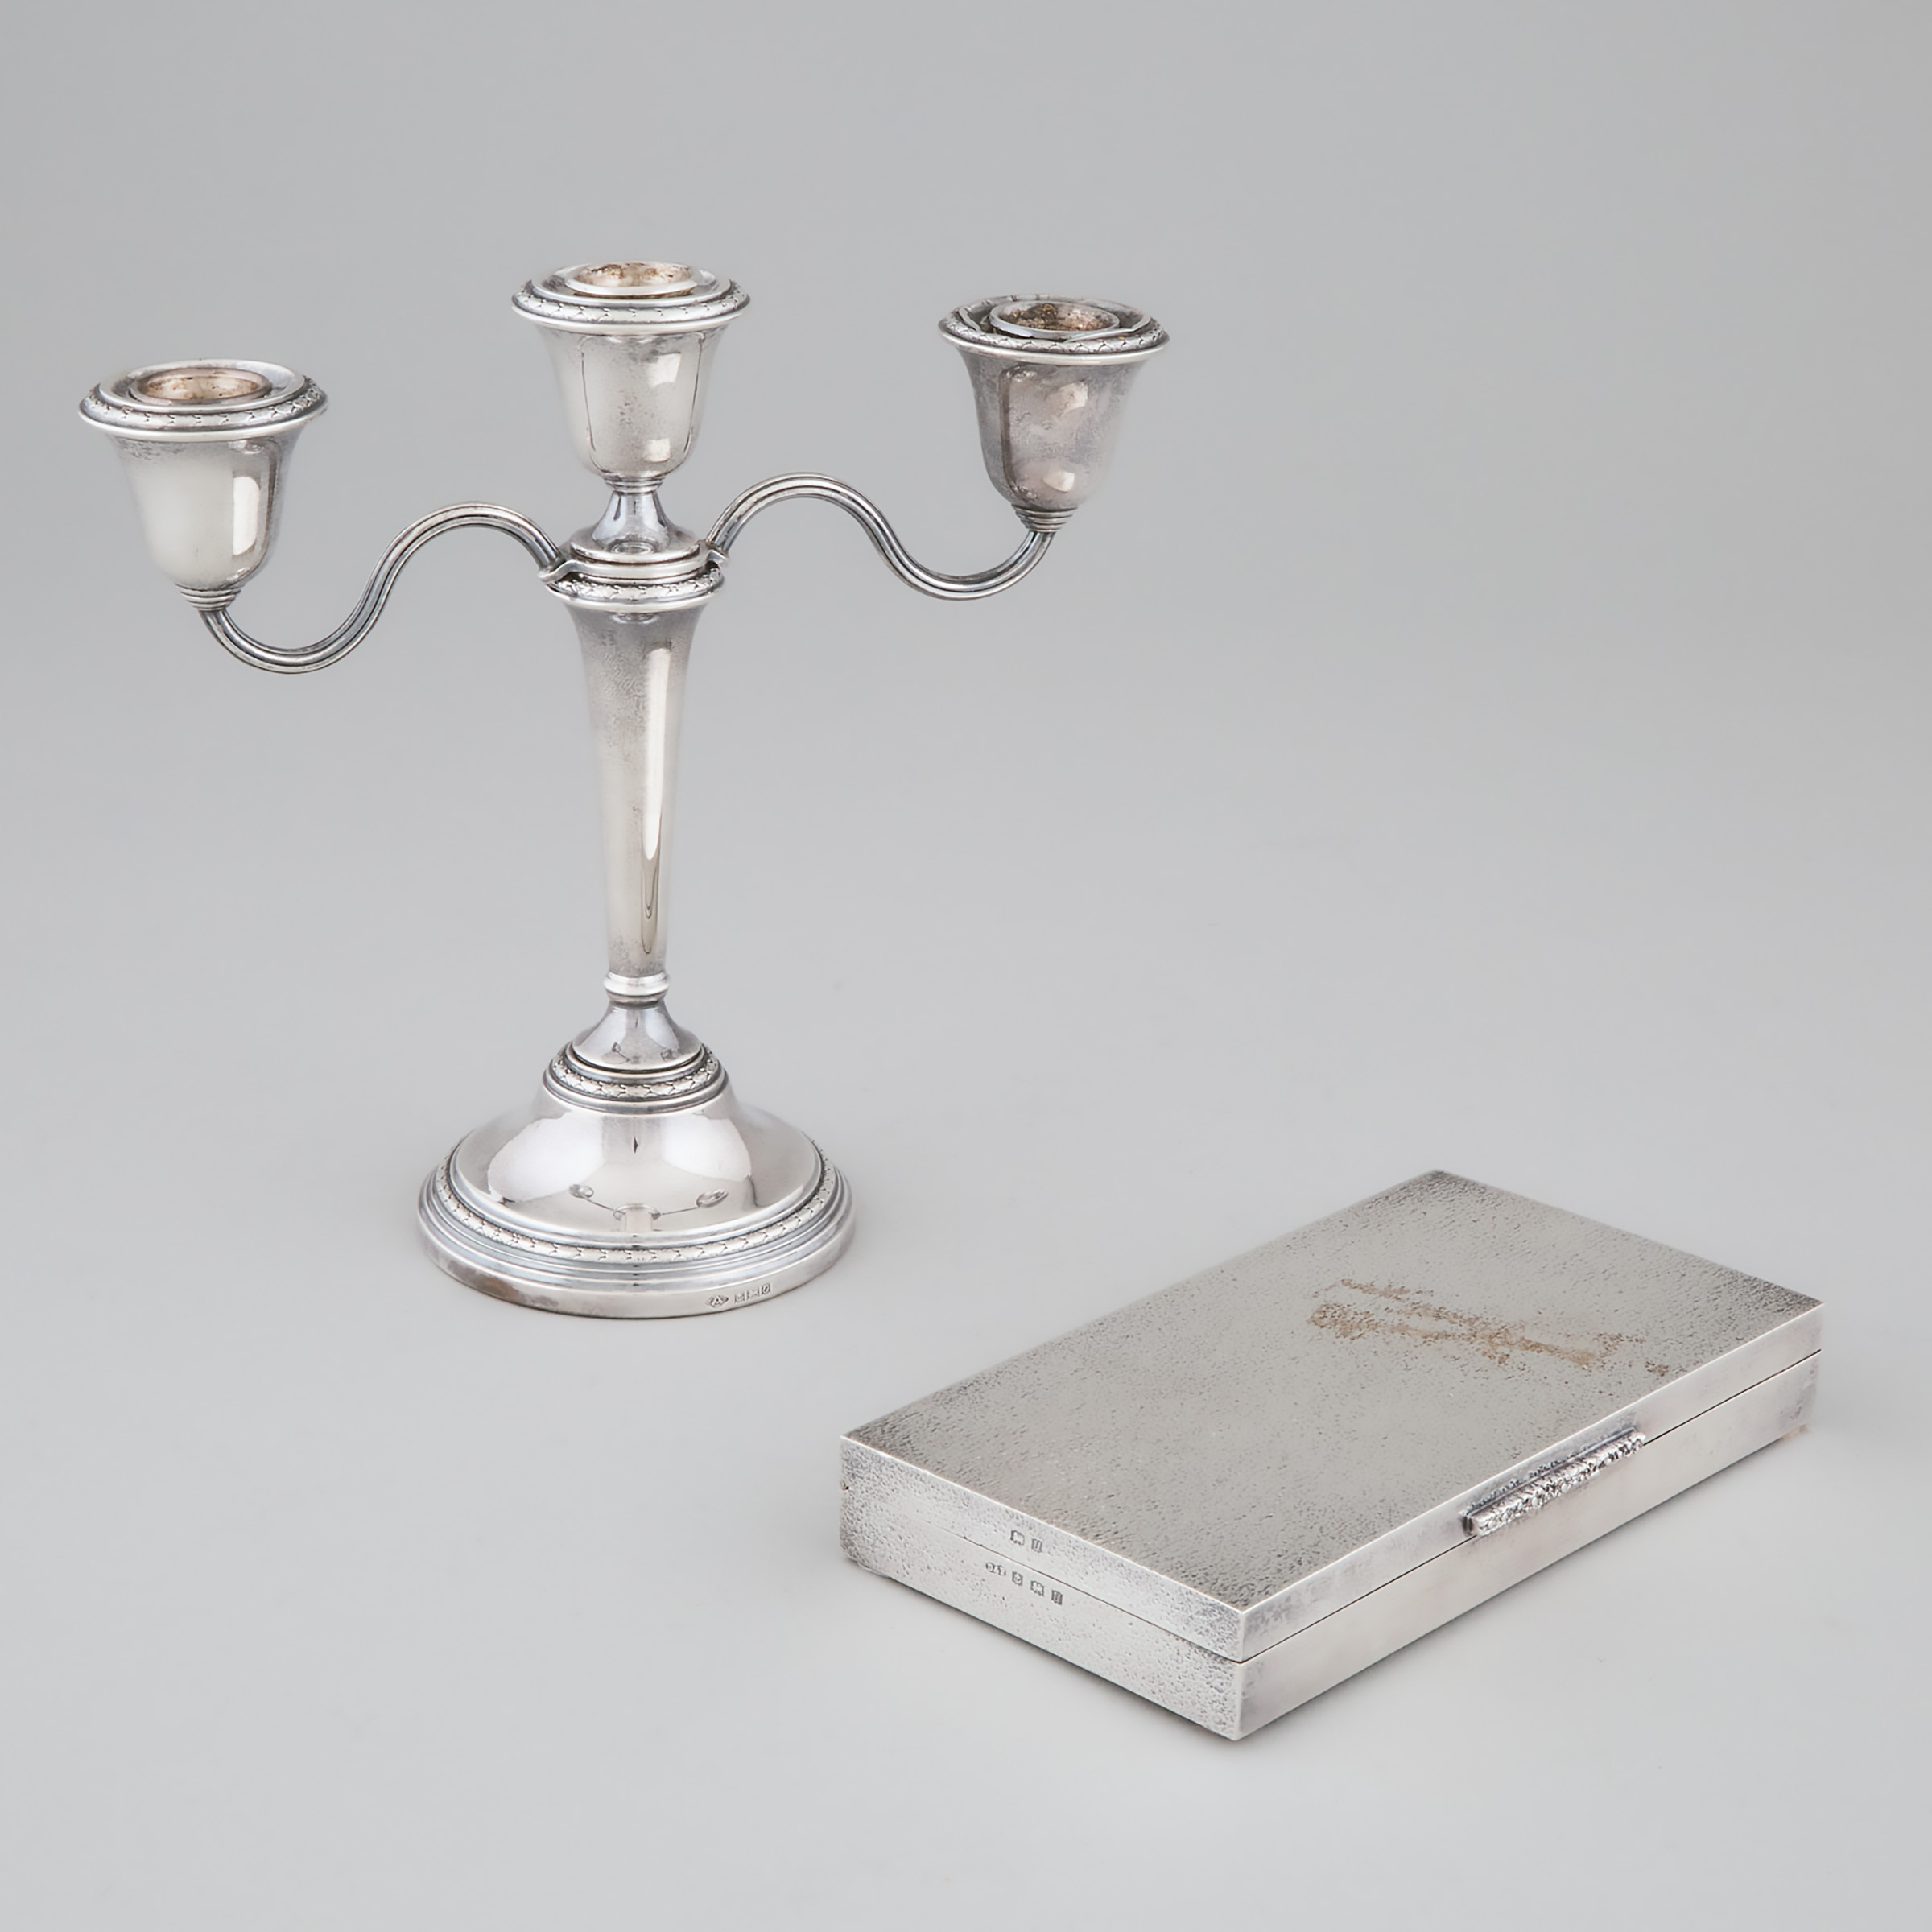 English Silver Three-Light Candelabrum and Cigarette Box, Adie Brothers, and Deakin & Francis, Birmingham, 1963/69